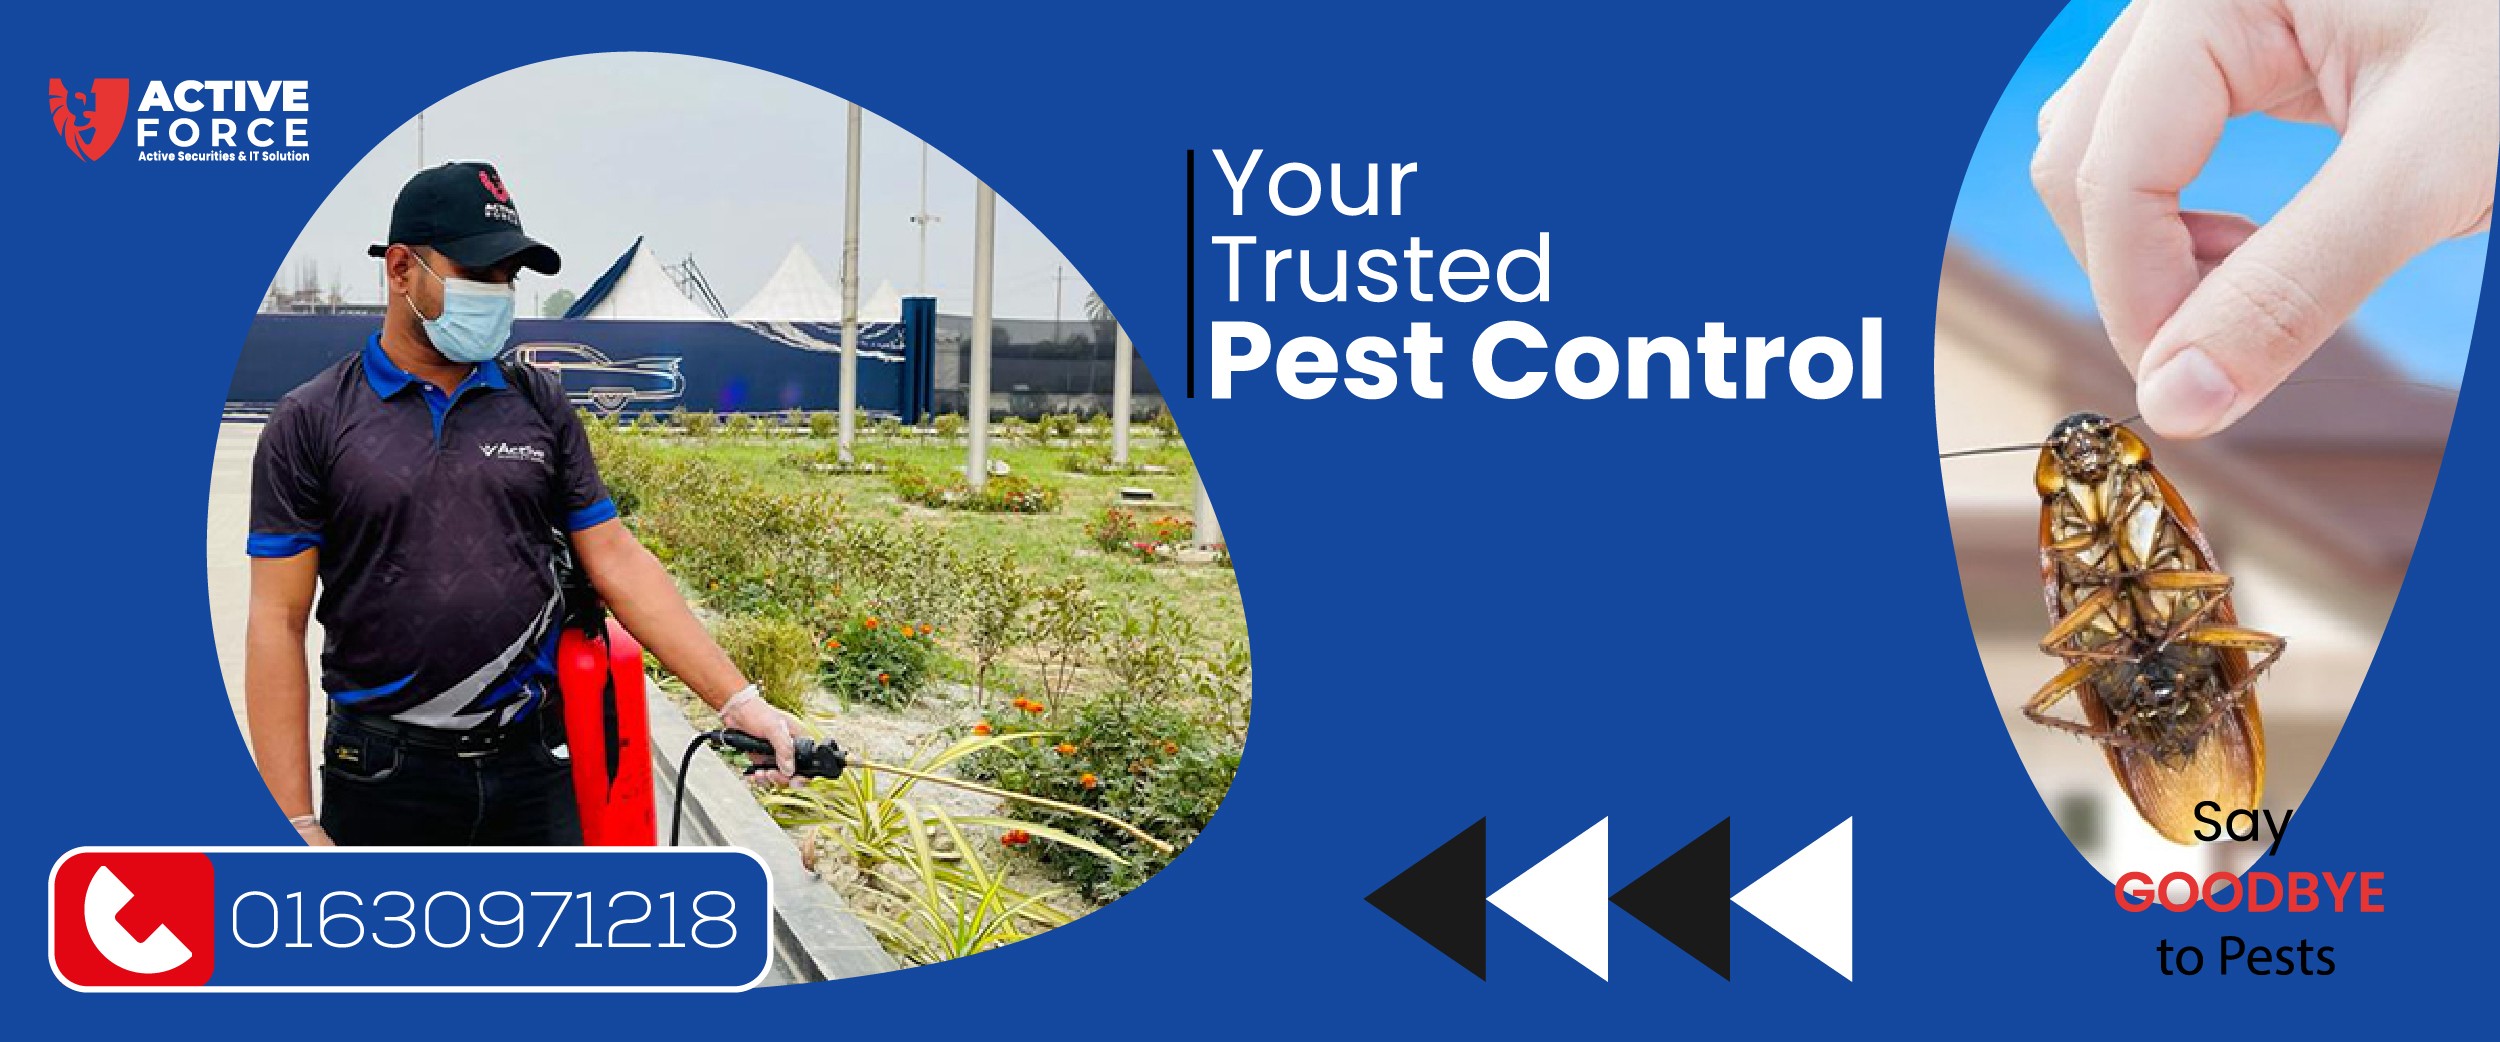 Say Goodbye to Pests! Your Trusted Pest Control Near Me